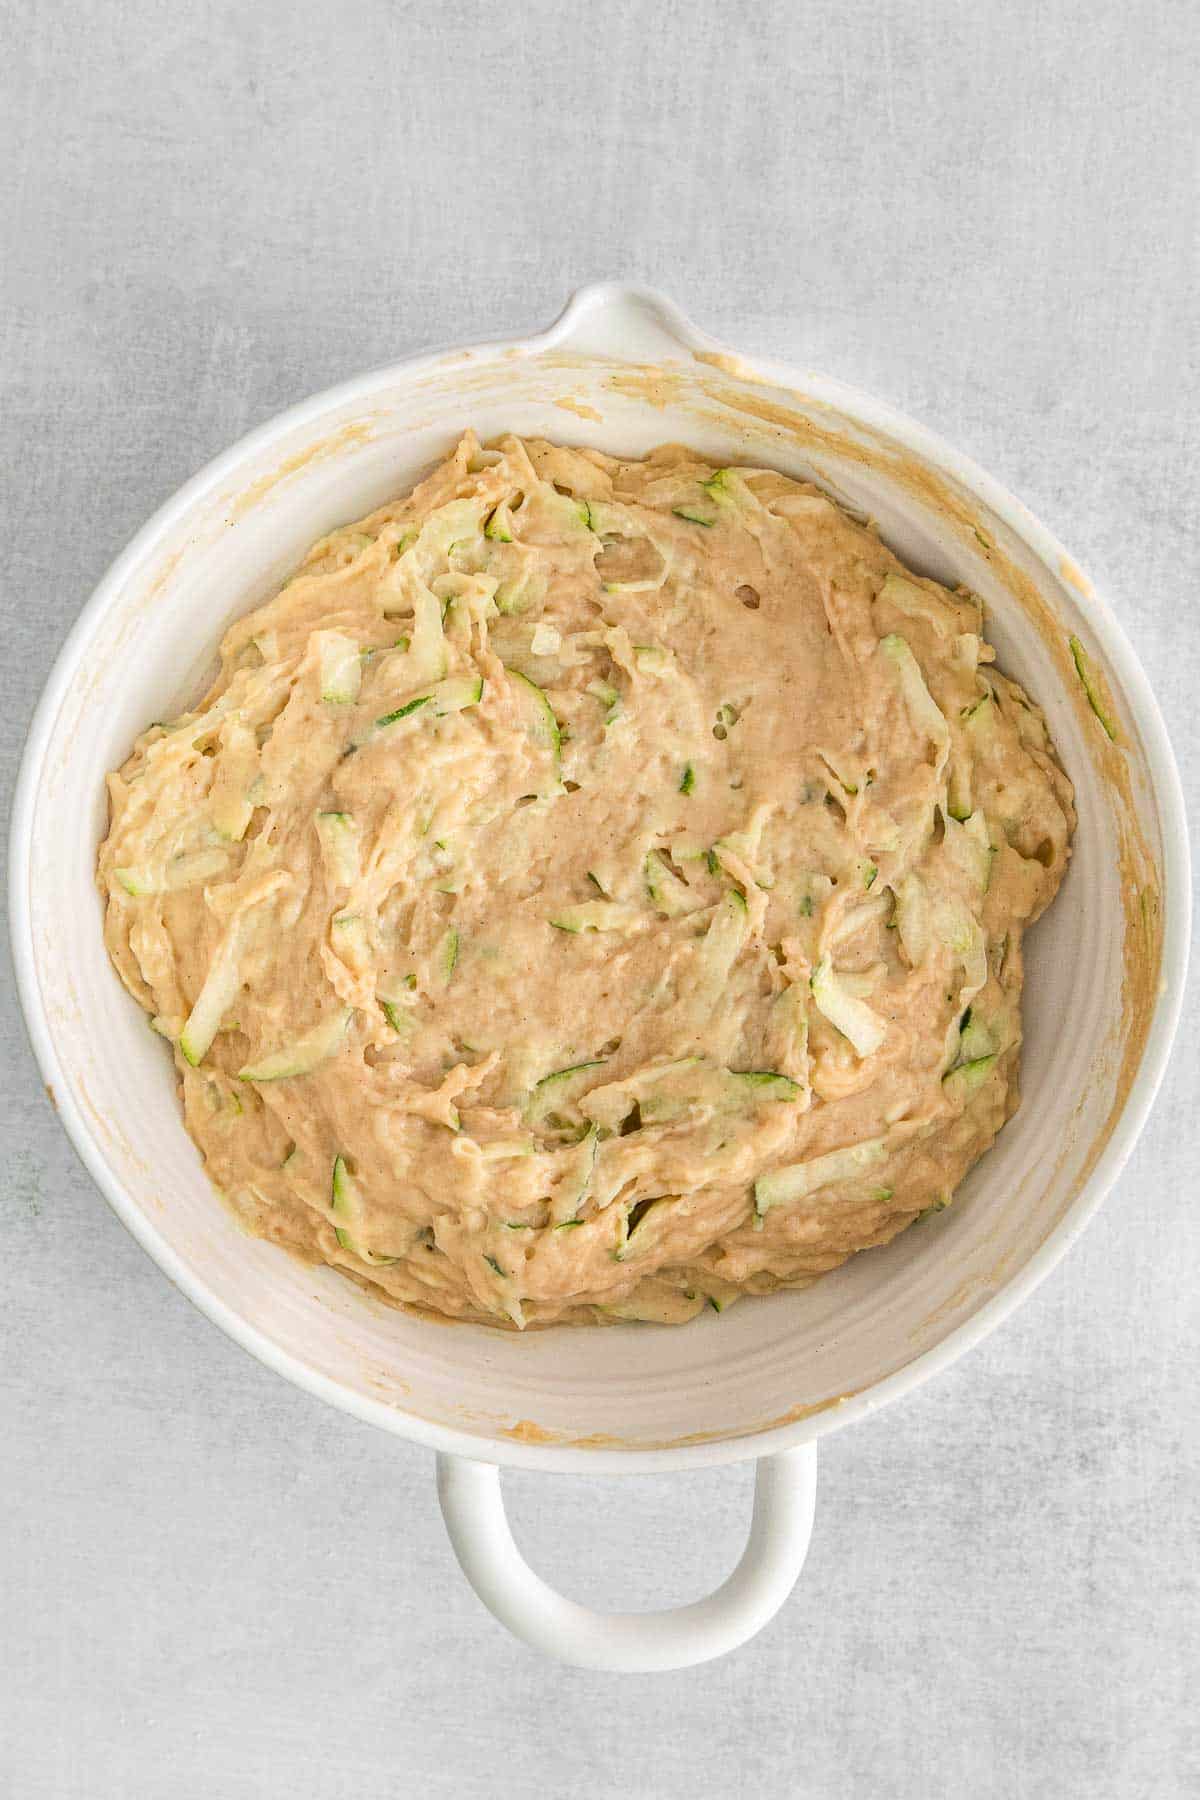 Zucchini bread batter in white mixing bowl.